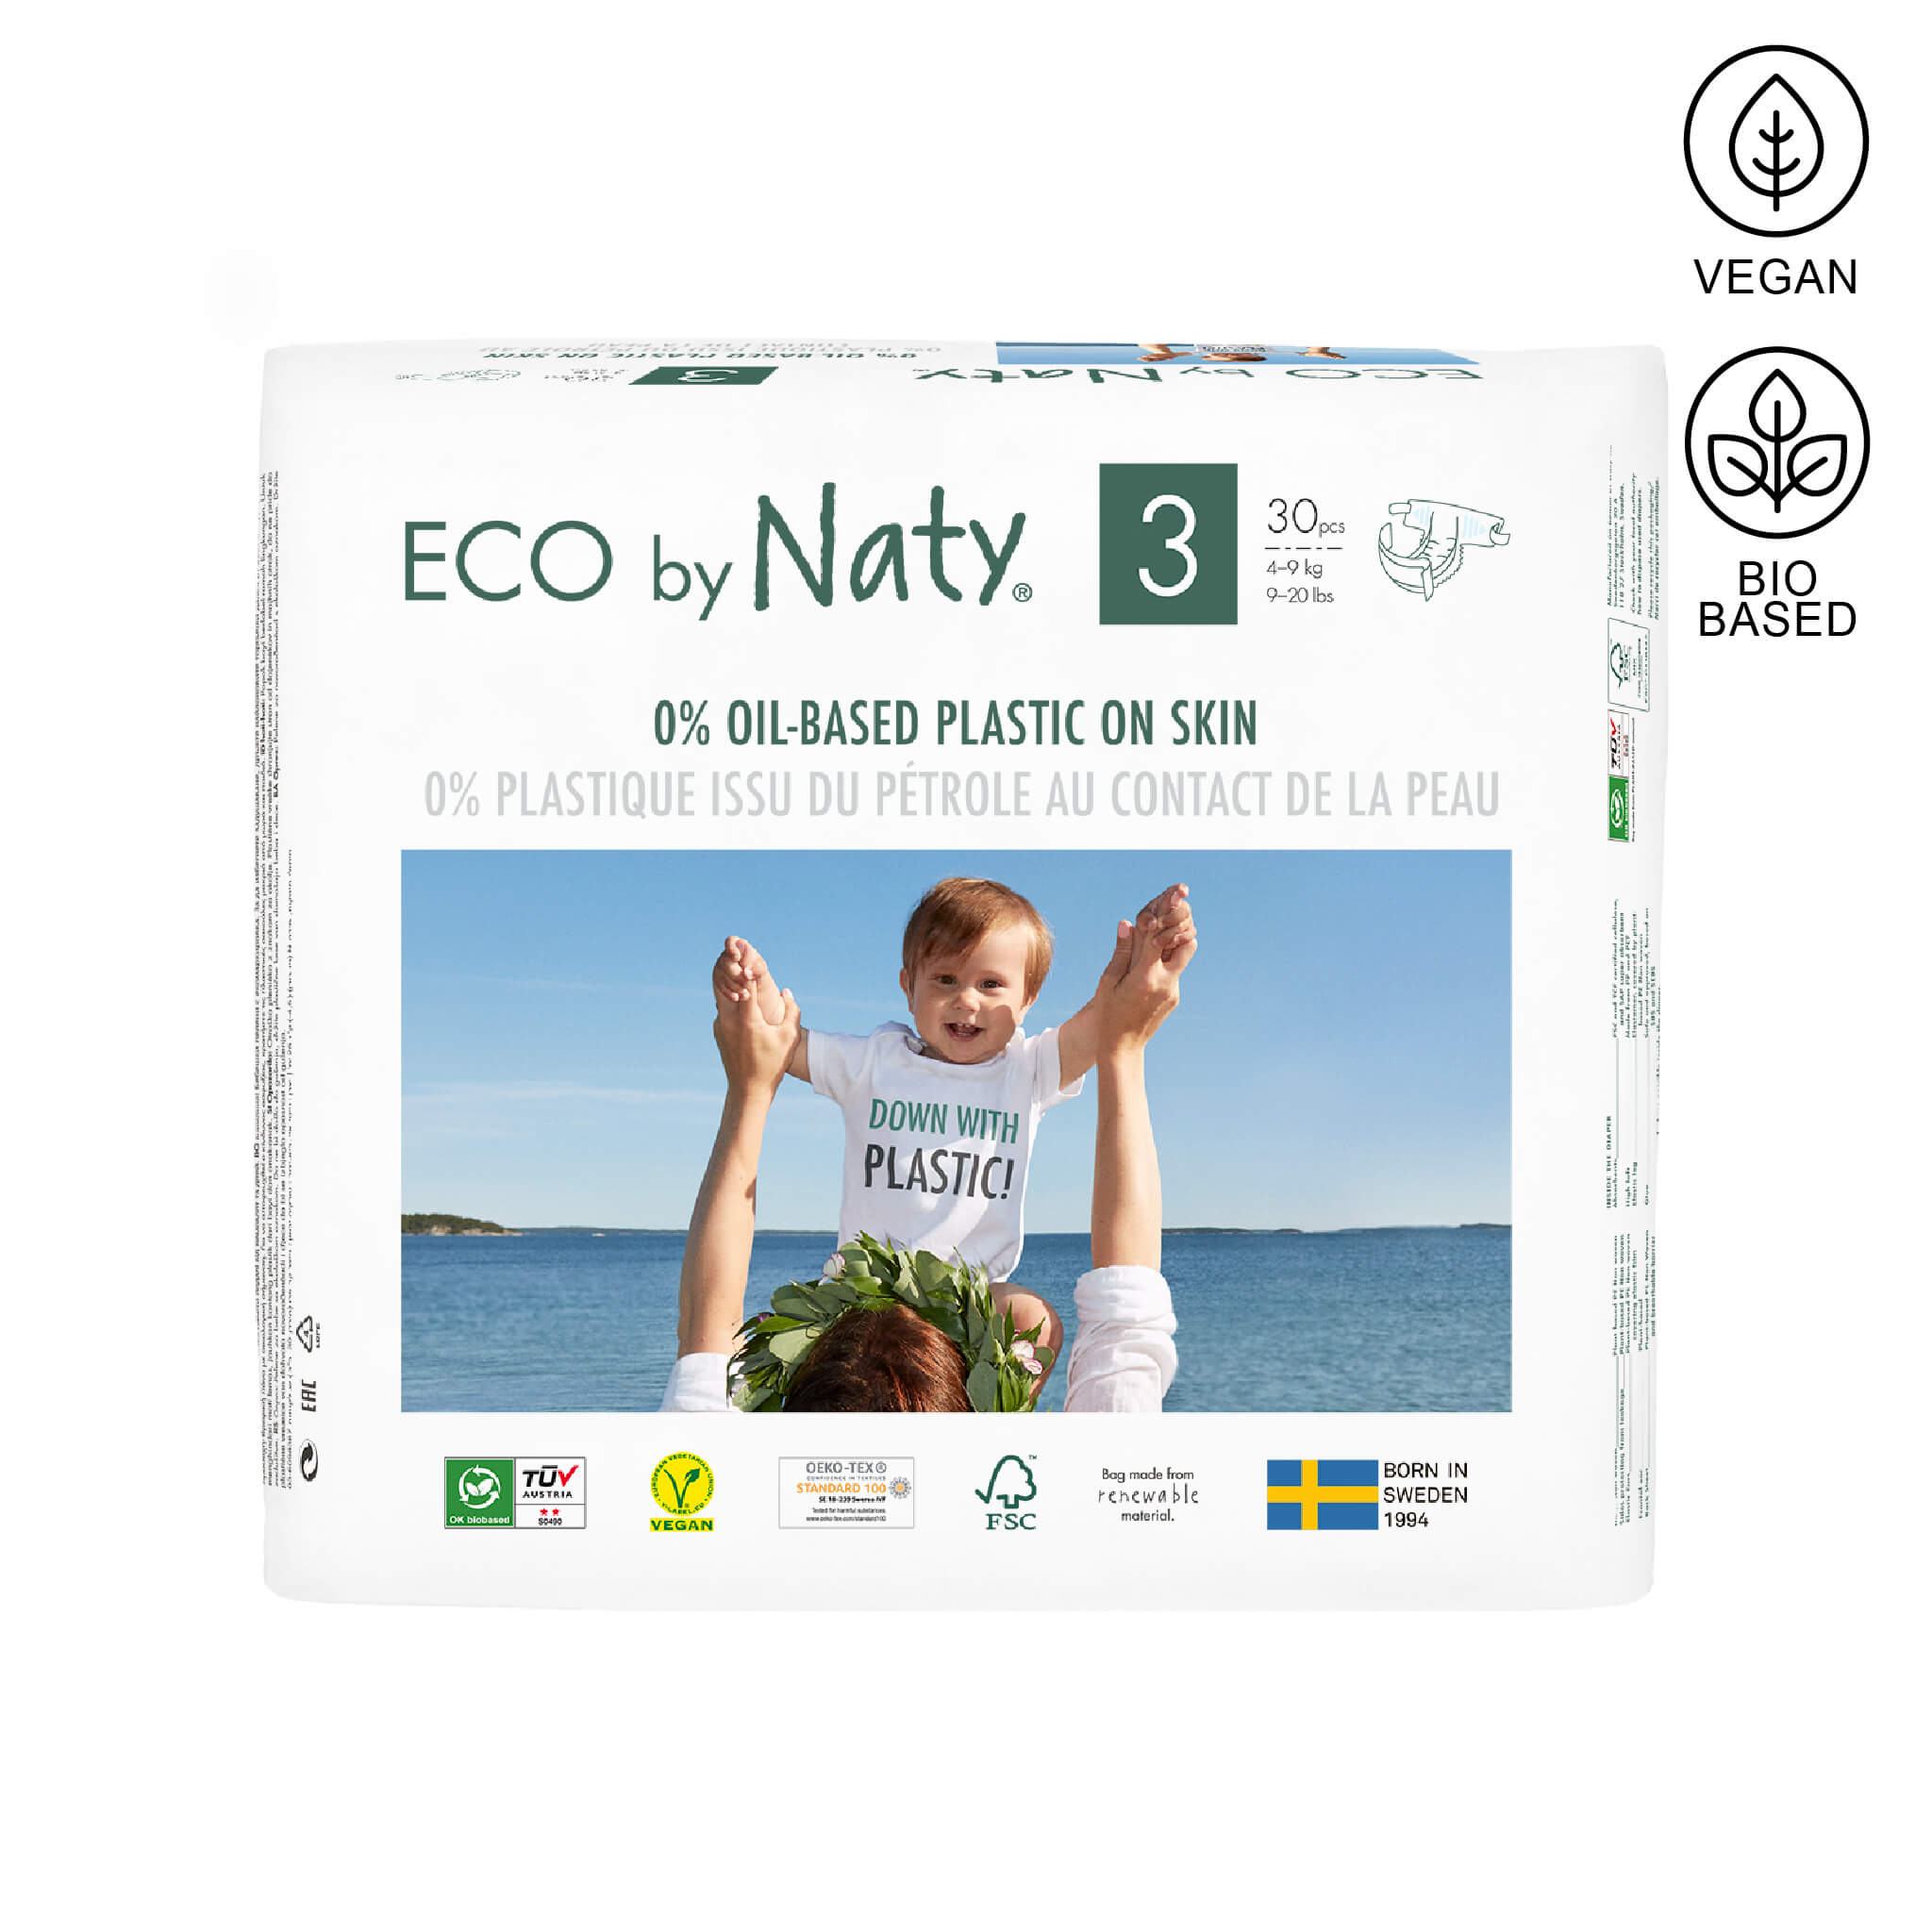 Eco by Naty Size 3 diapers package of 30 units.